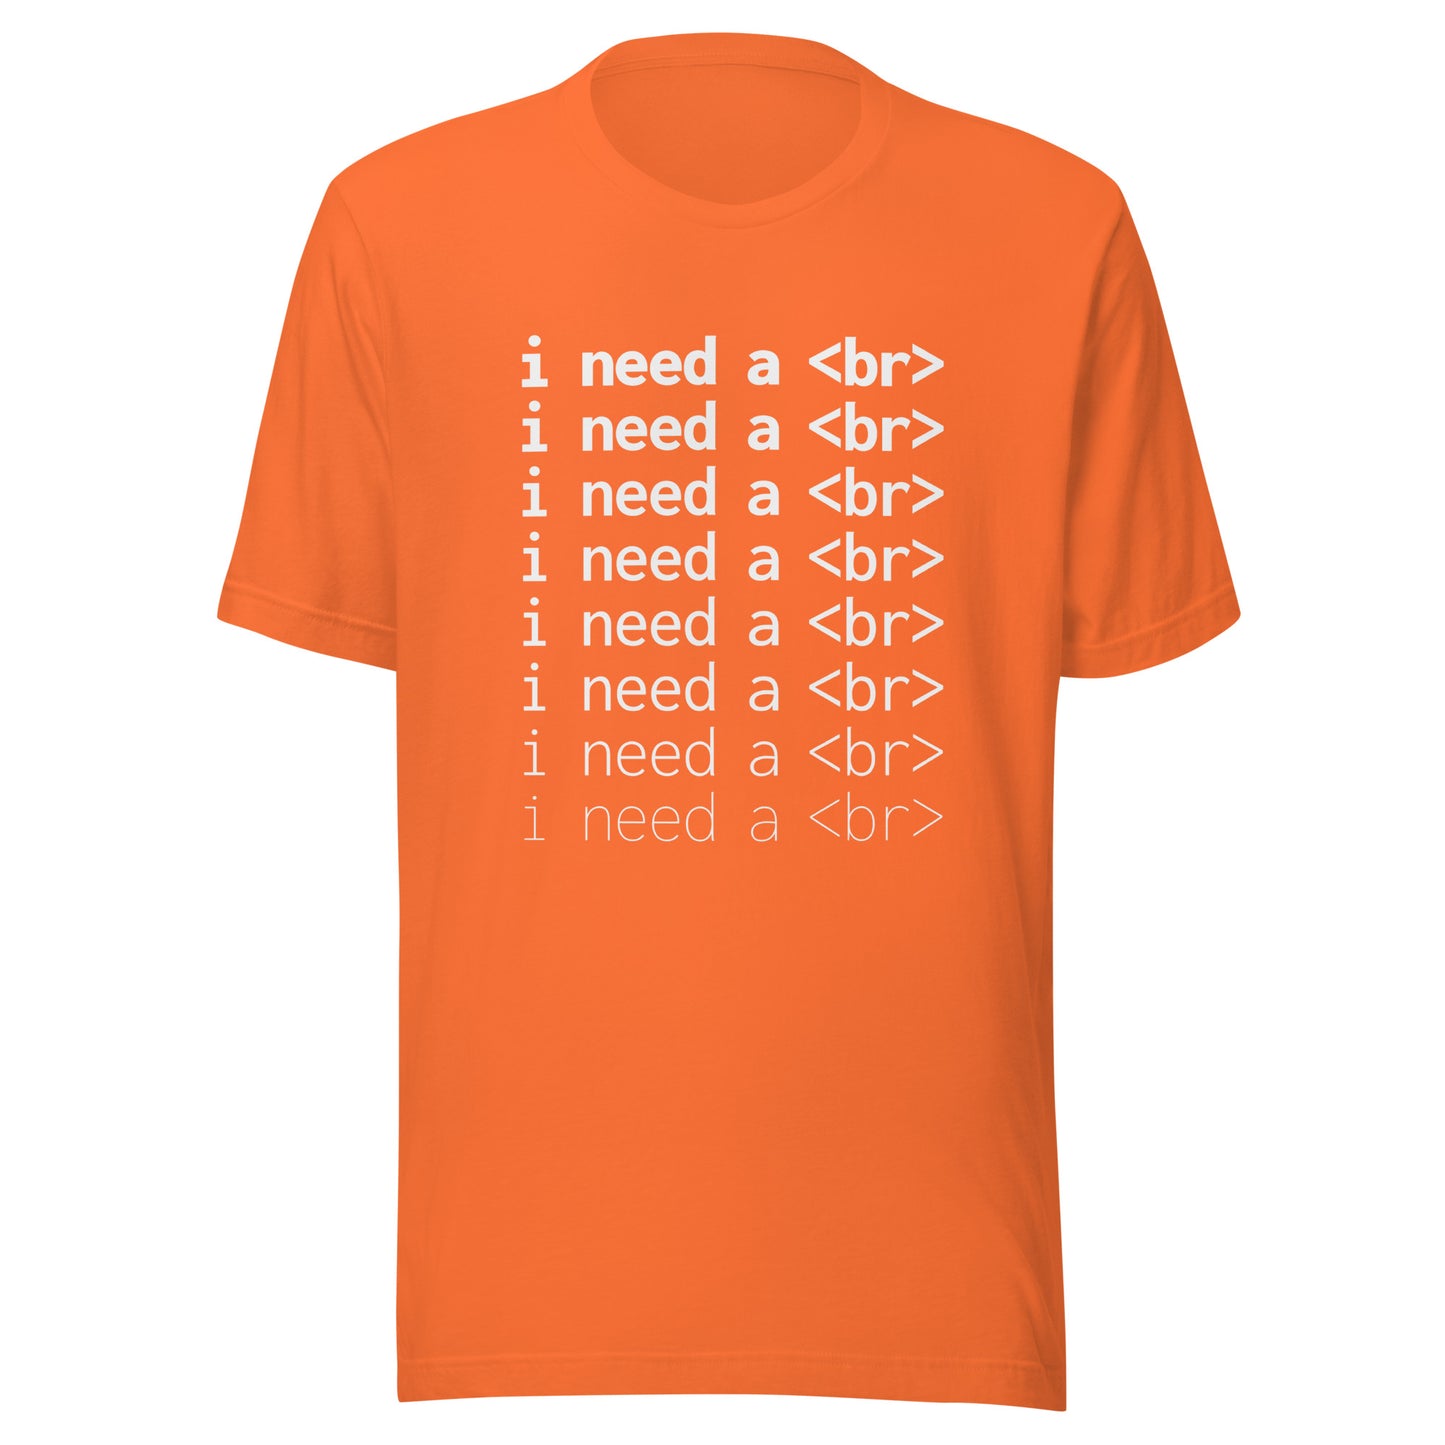 I need a <br> (White Text) - Unisex T-shirt